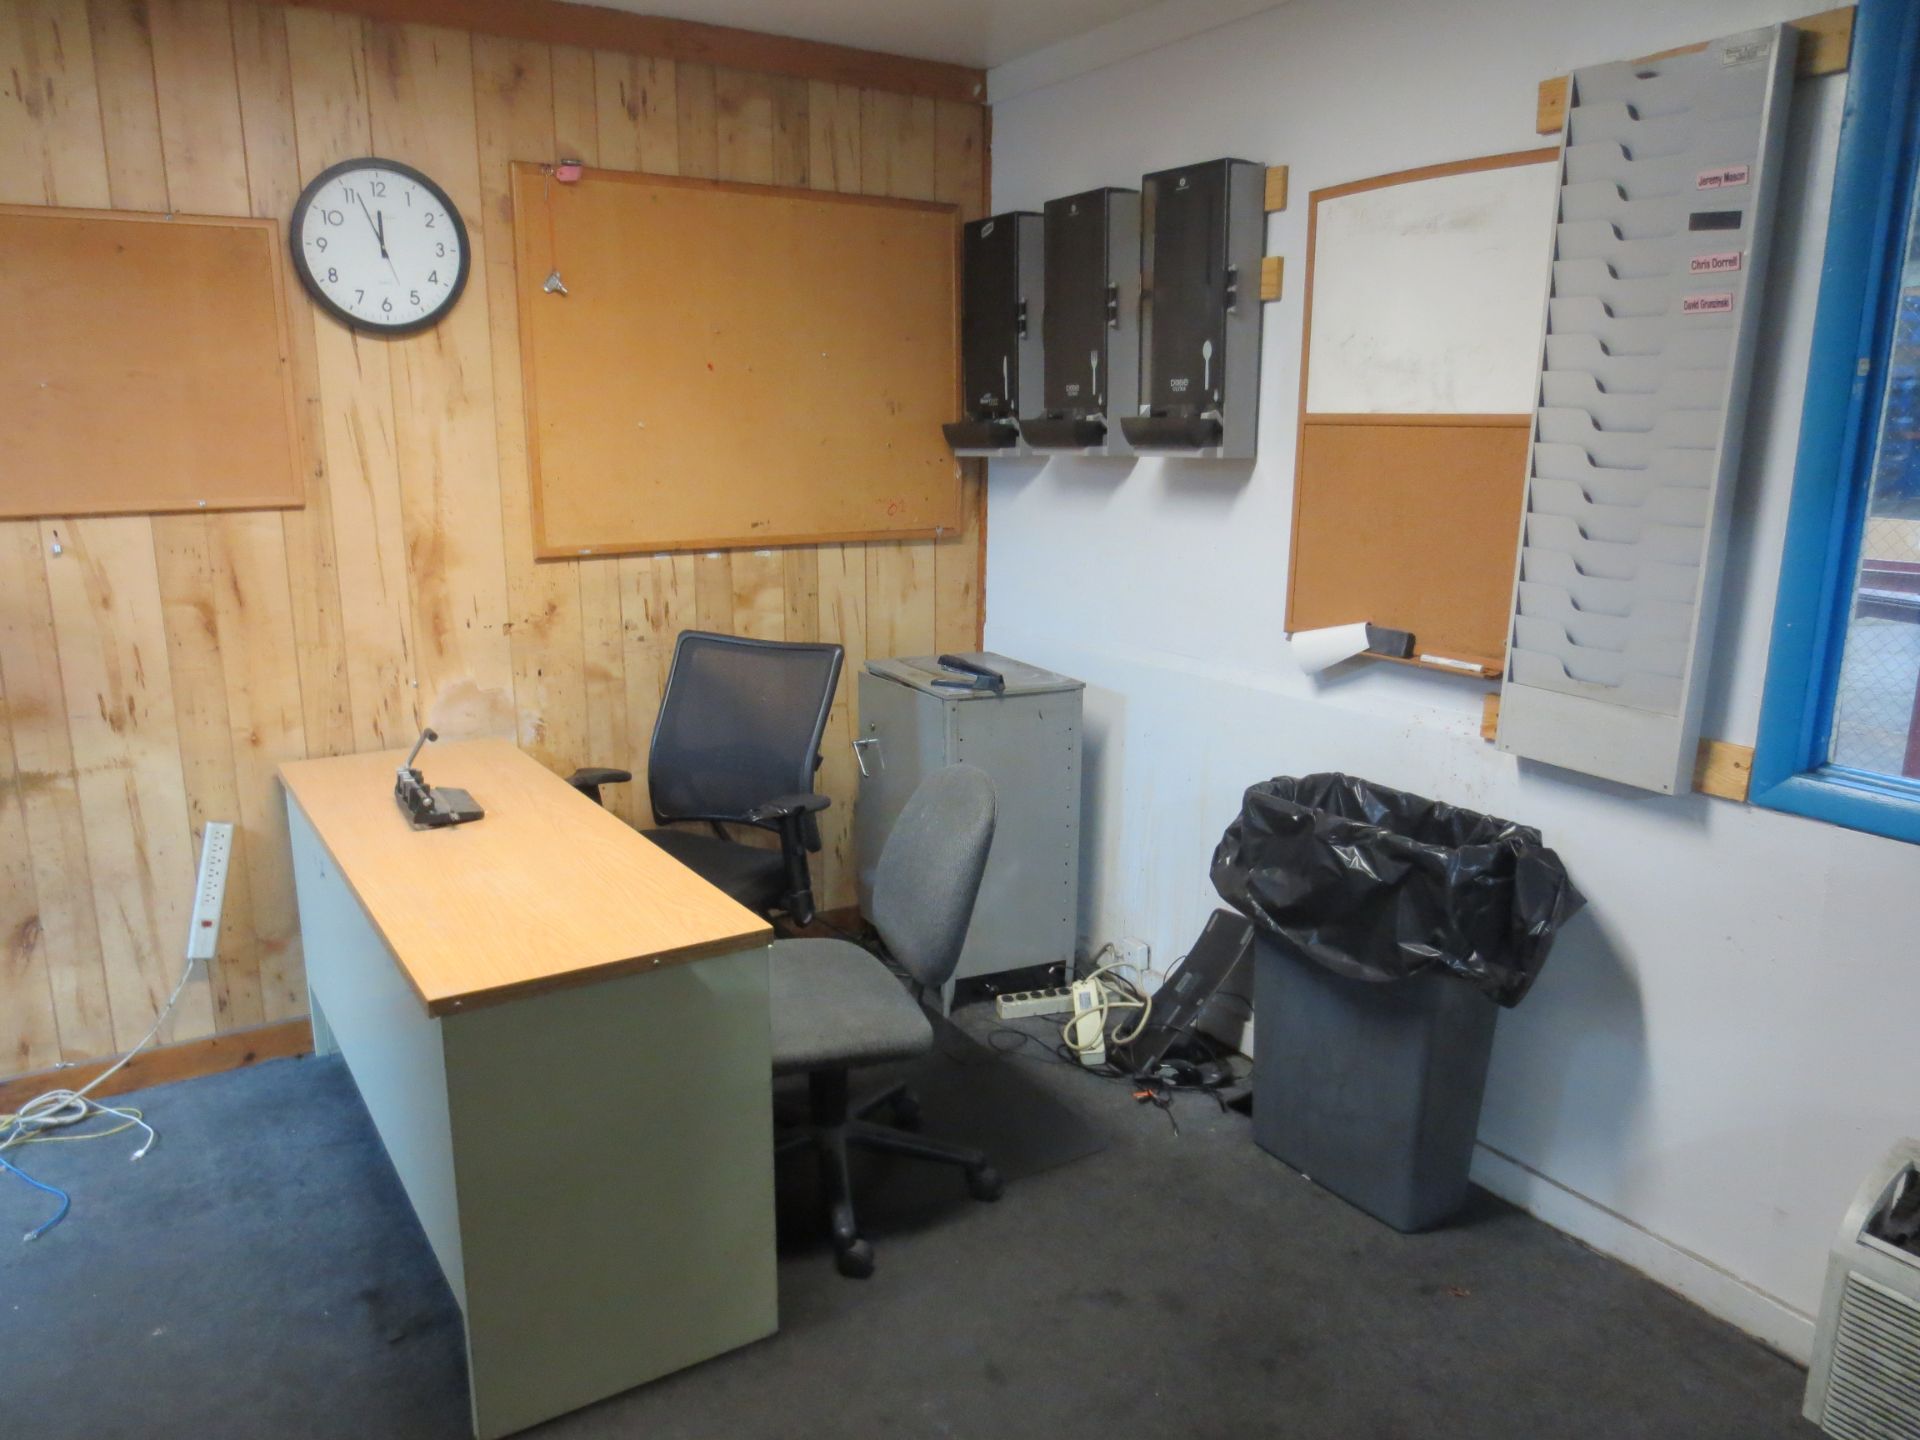 Contents of 2 Offices with Lockers - Bild 6 aus 6